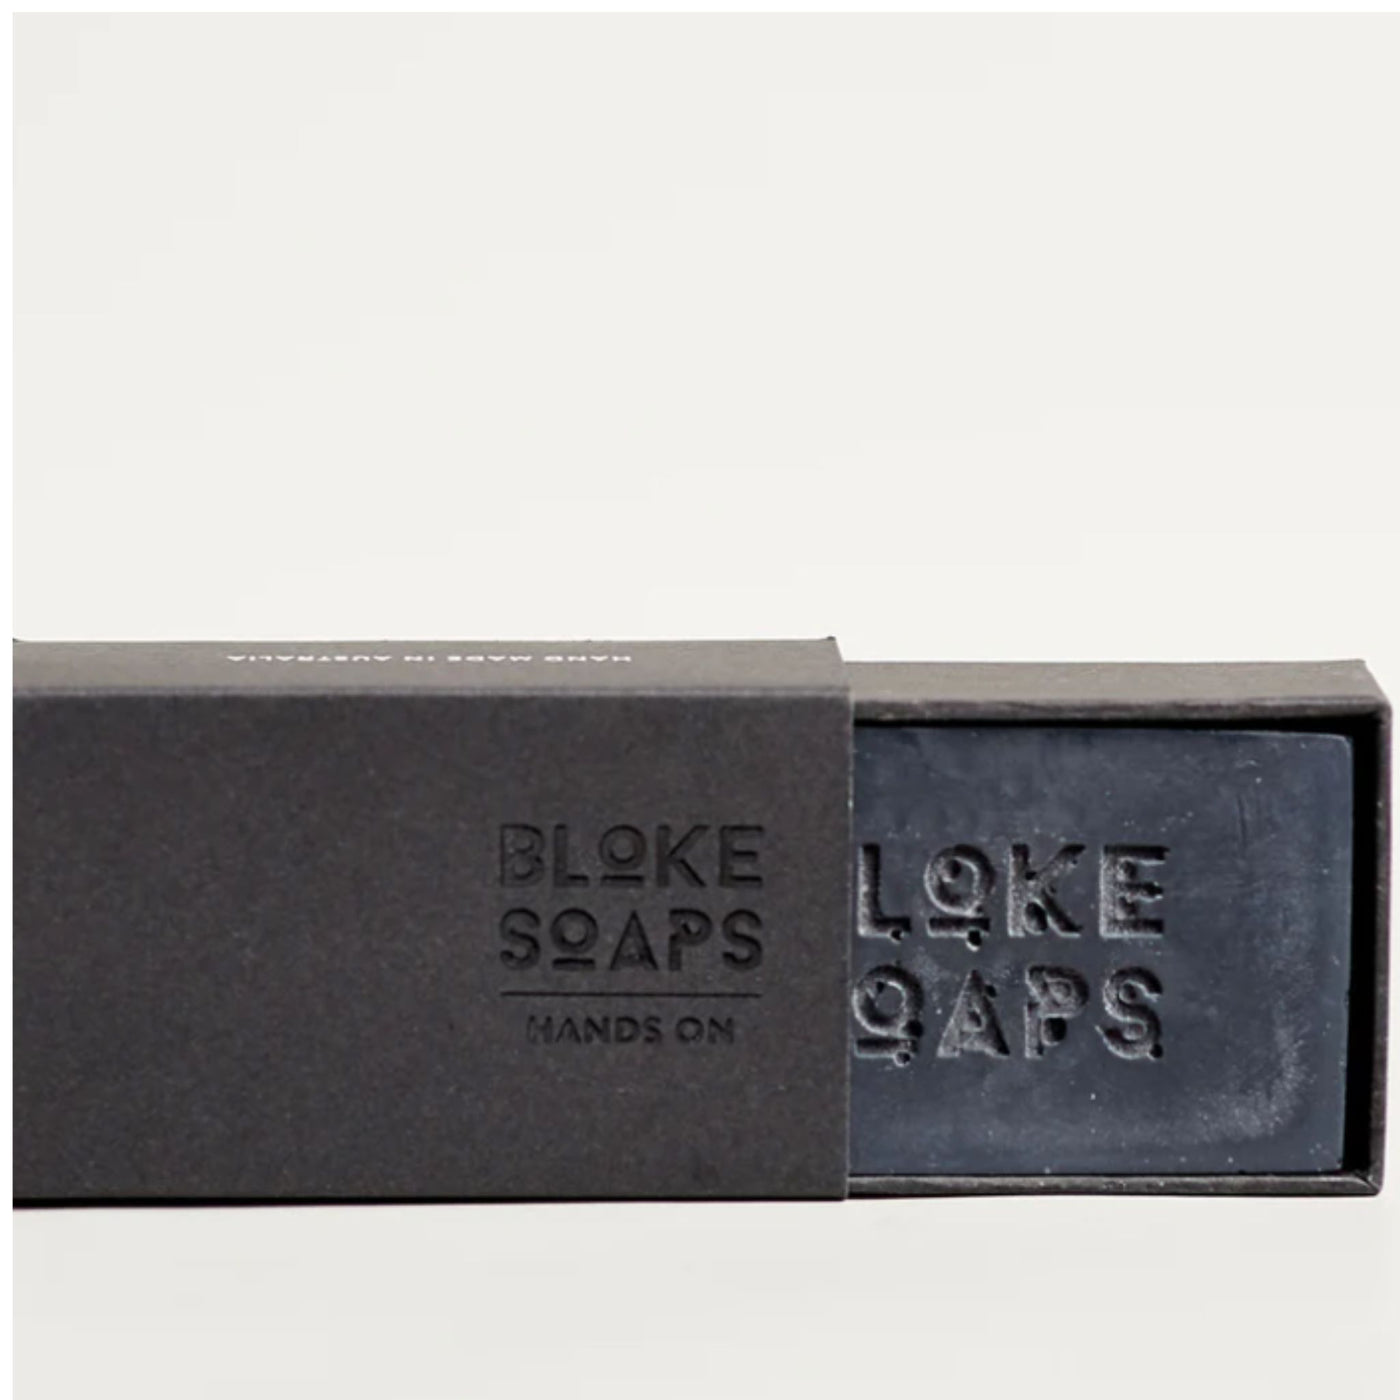 Blokes Soaps Hands On Bar Soap